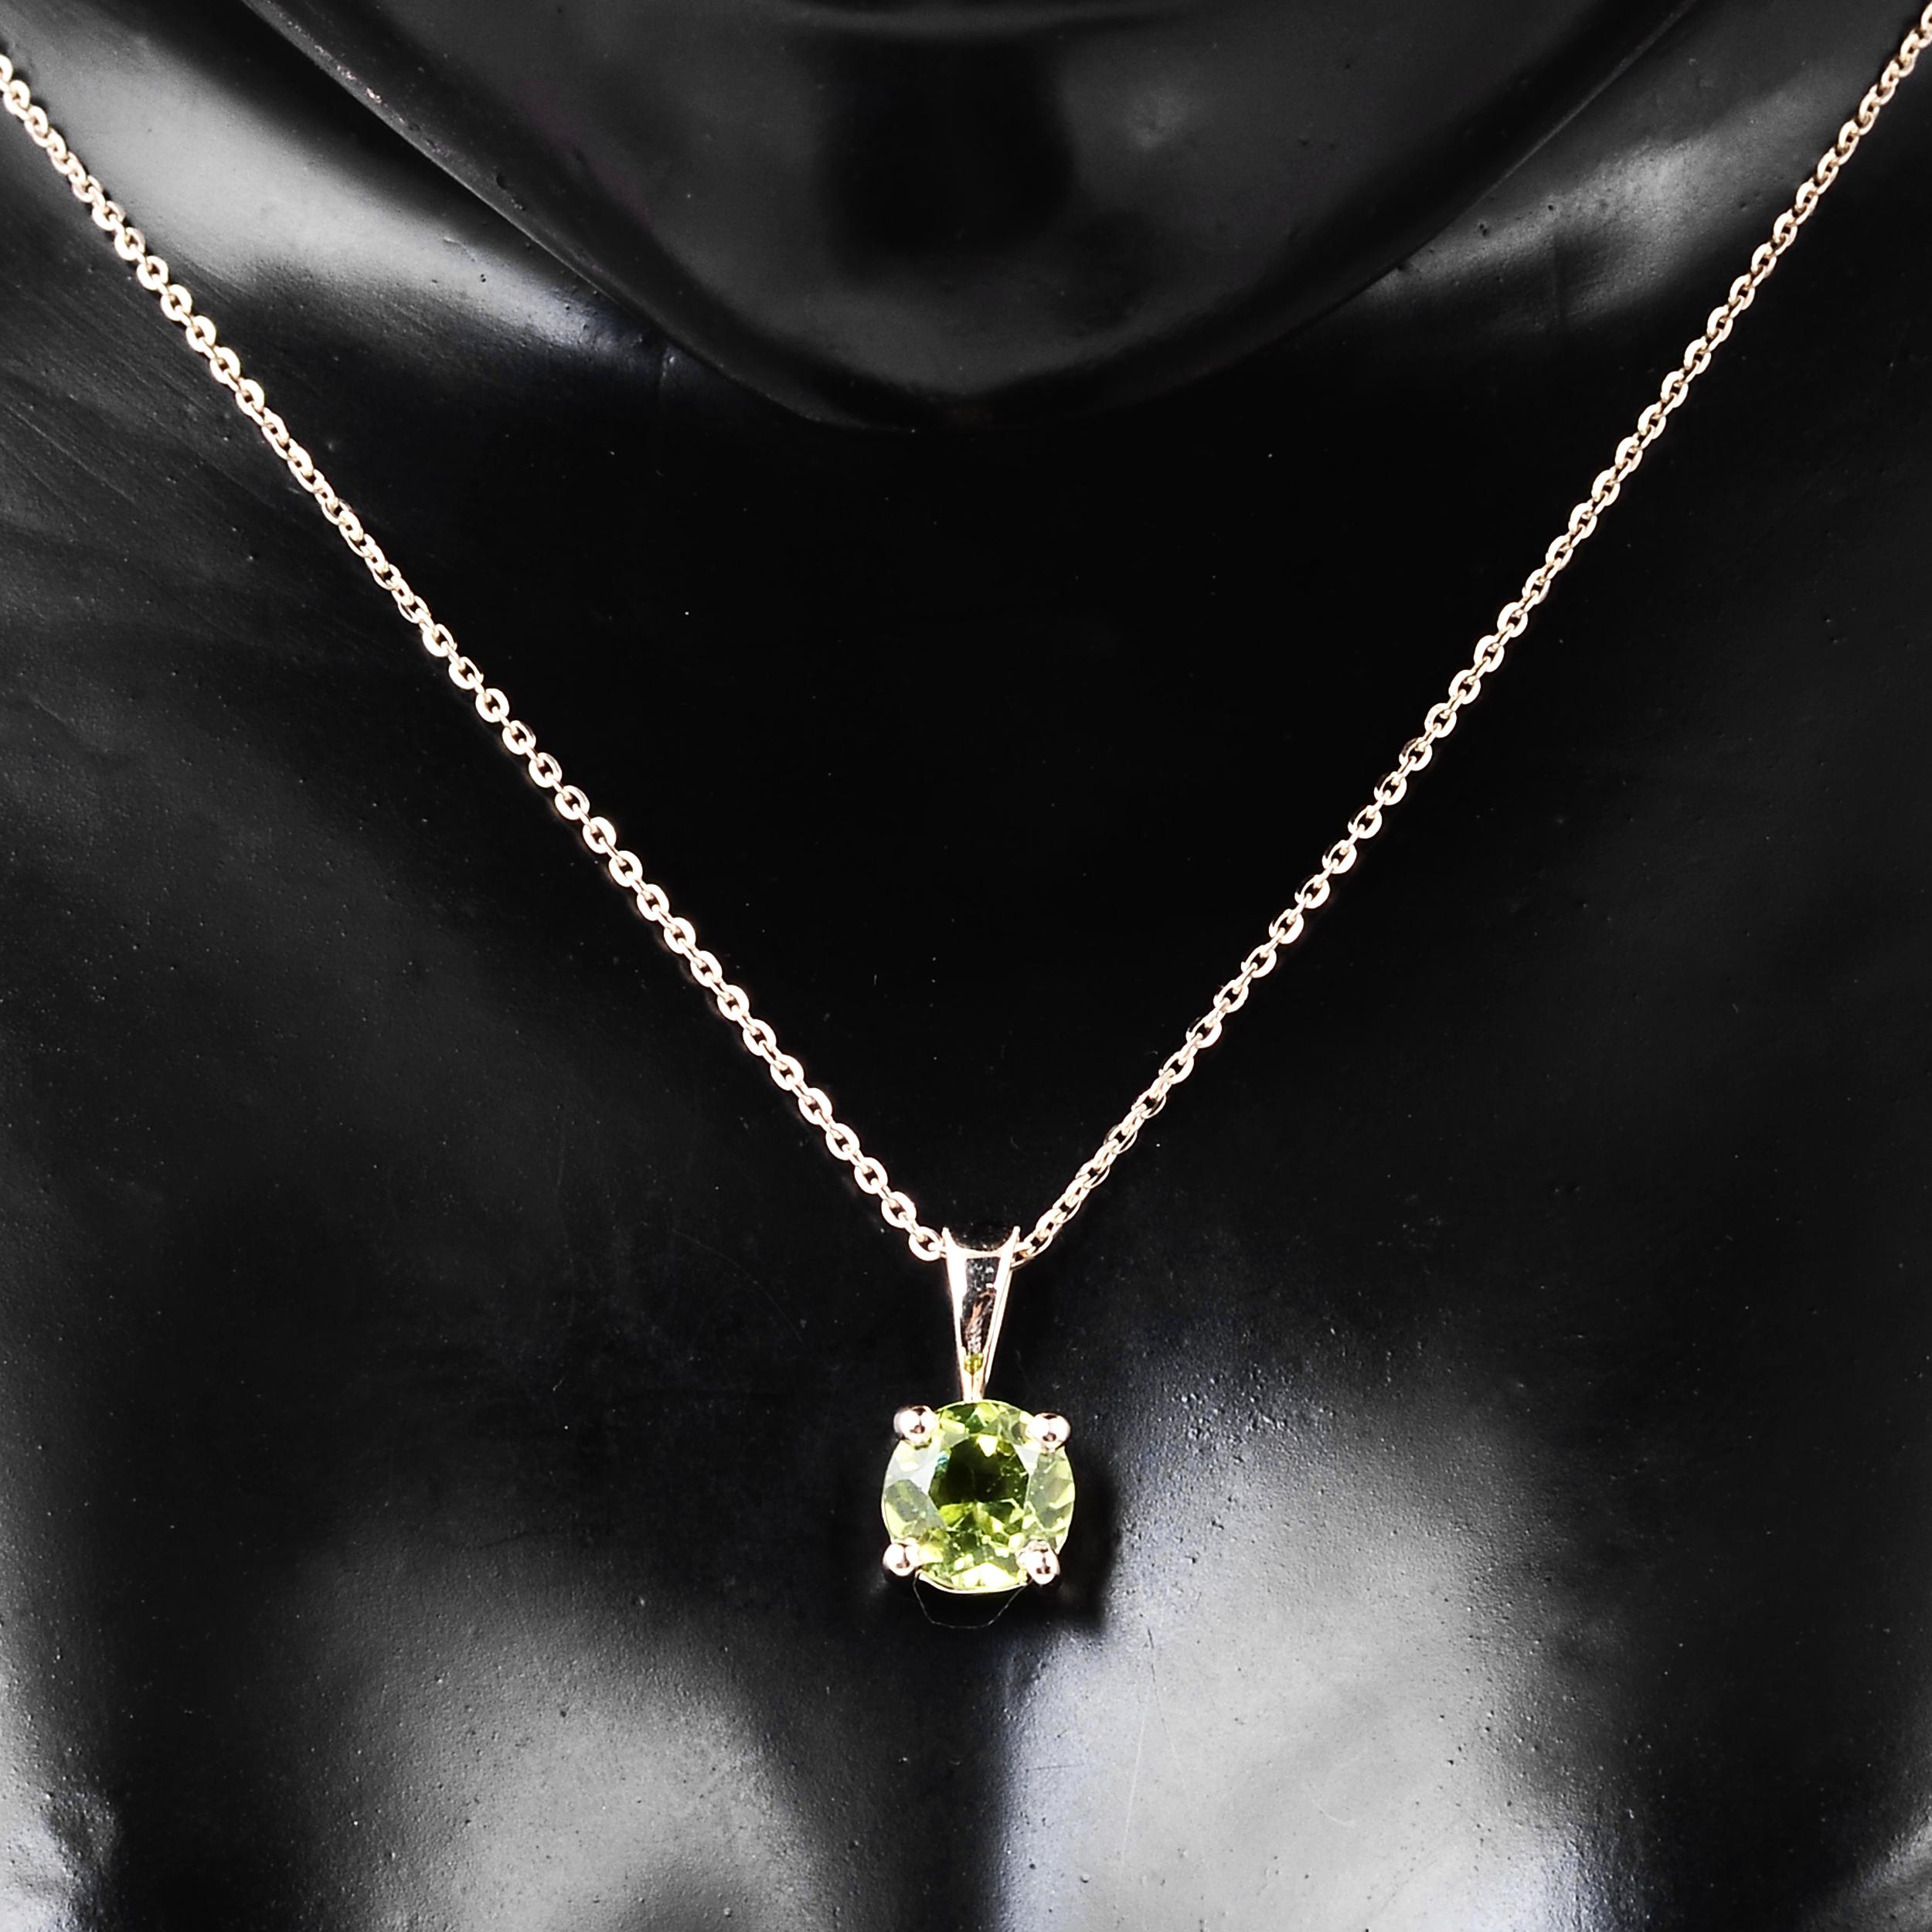 Elevate your style with our exquisite Harmony in Green Peridot Pendant nature-inspired collection. This pendant encapsulates the tranquil allure of the Peridot stone while harmonizing seamlessly with the serene essence of our brand.

Crafted with